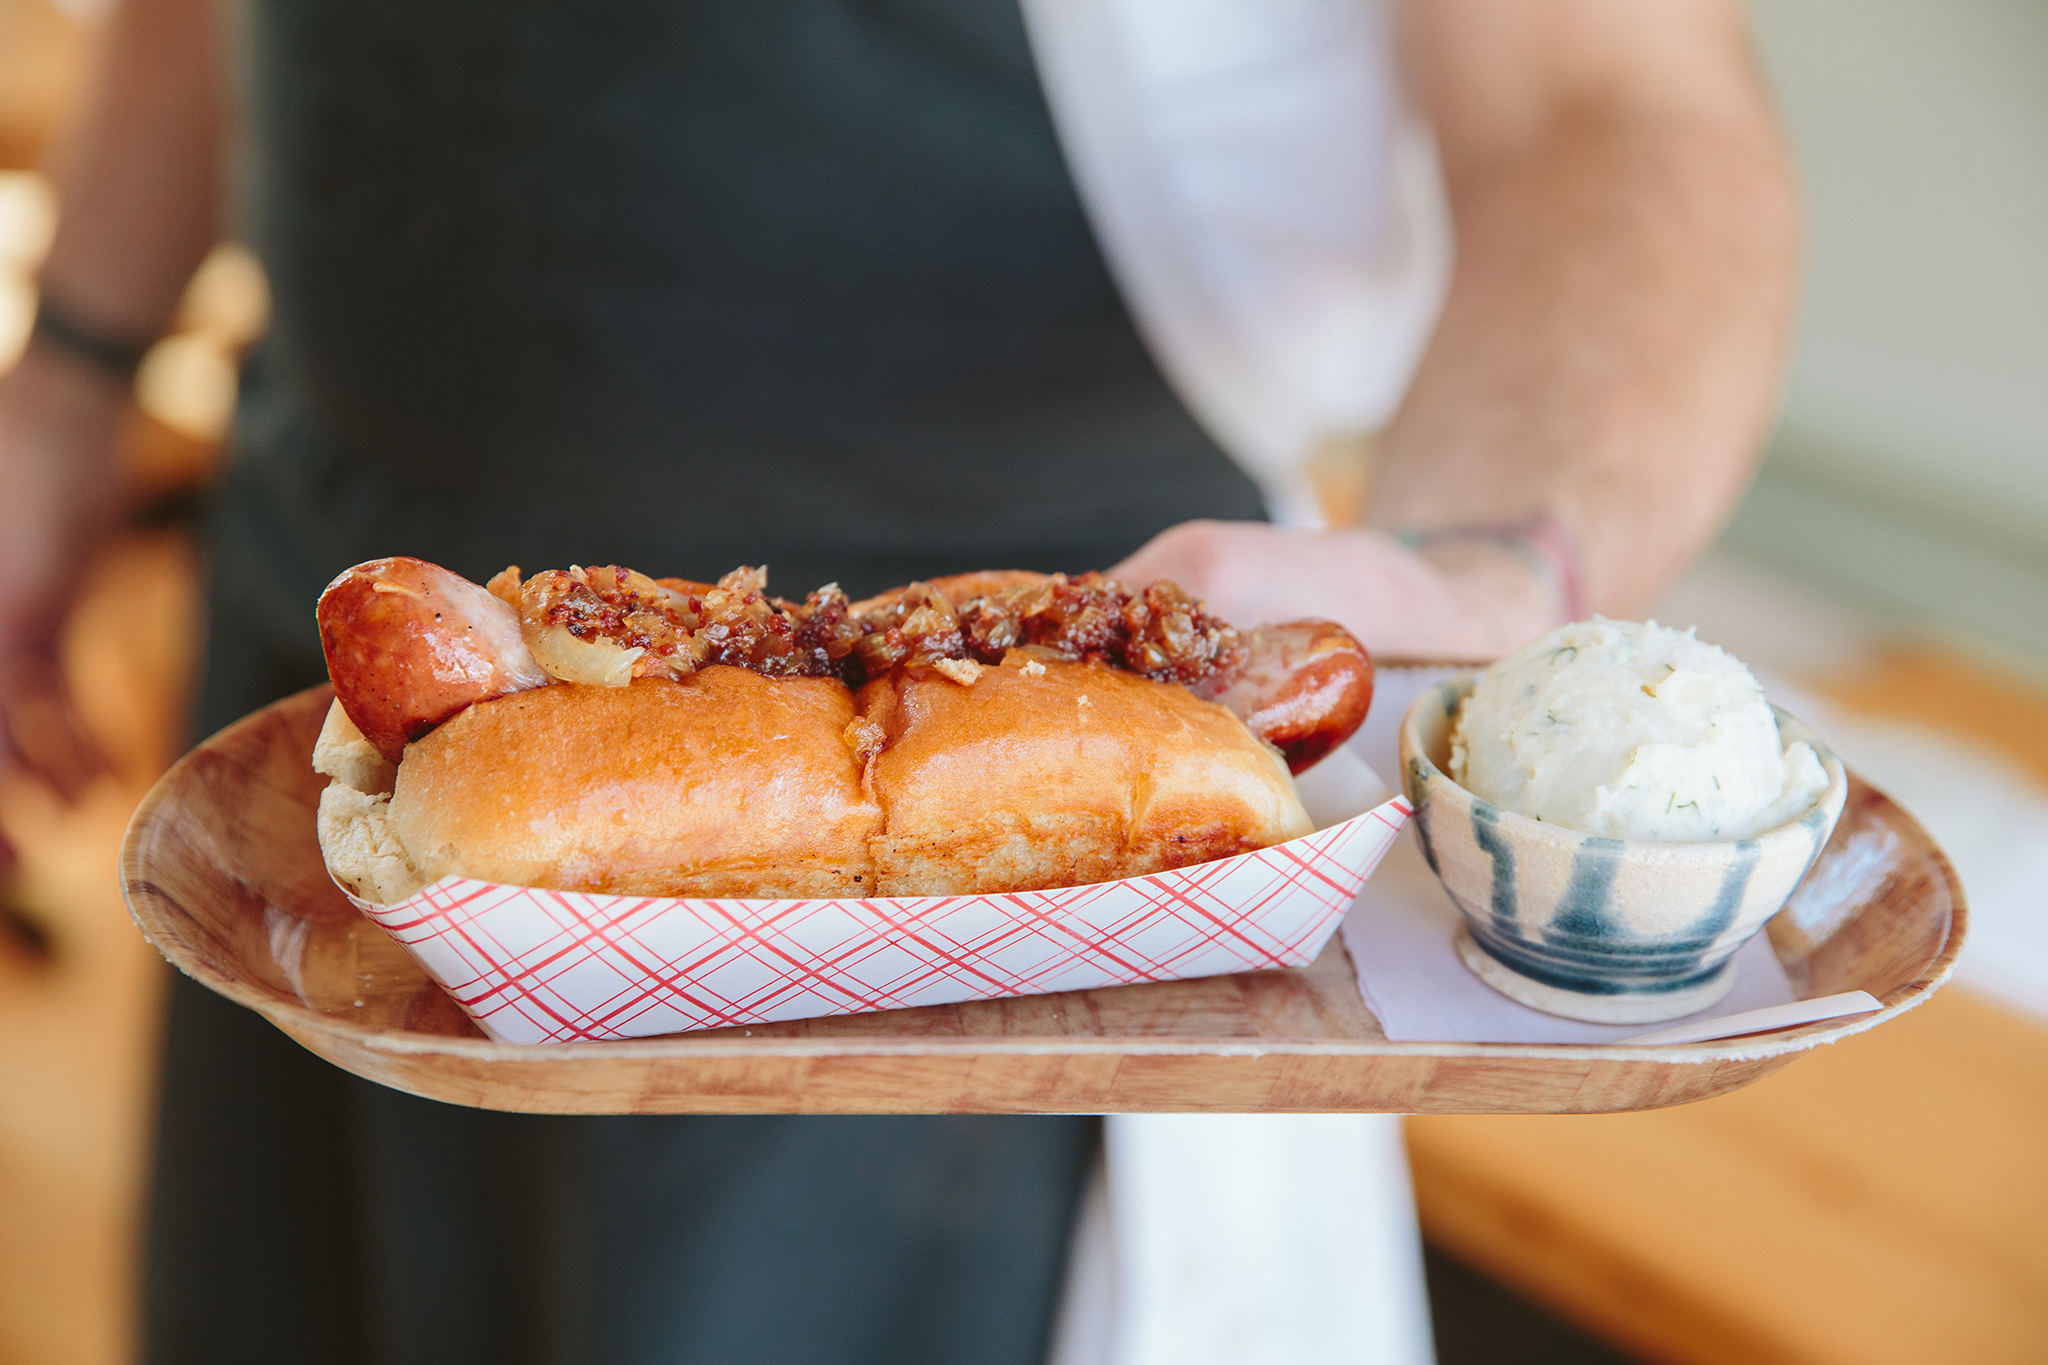 WURST KITCHE PROVIDENCE THE FOOD LENS BRIAN SAMUELS PHOTOGRAPHY APRIL 2019 0299 Copy 